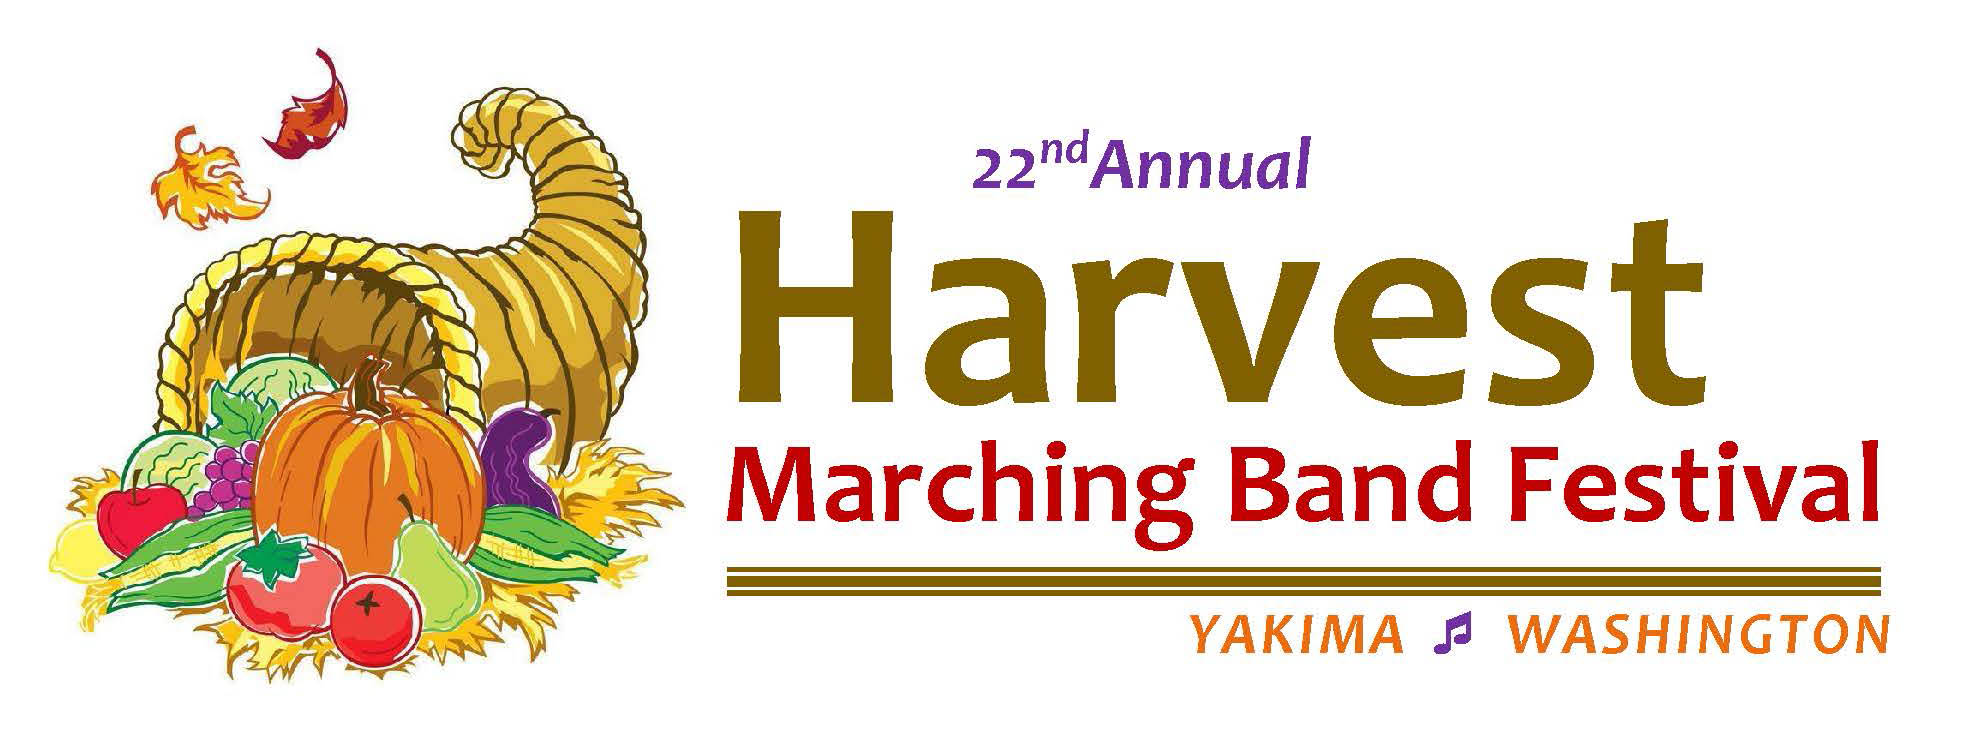 Welcome to the Harvest Marching Band Festival